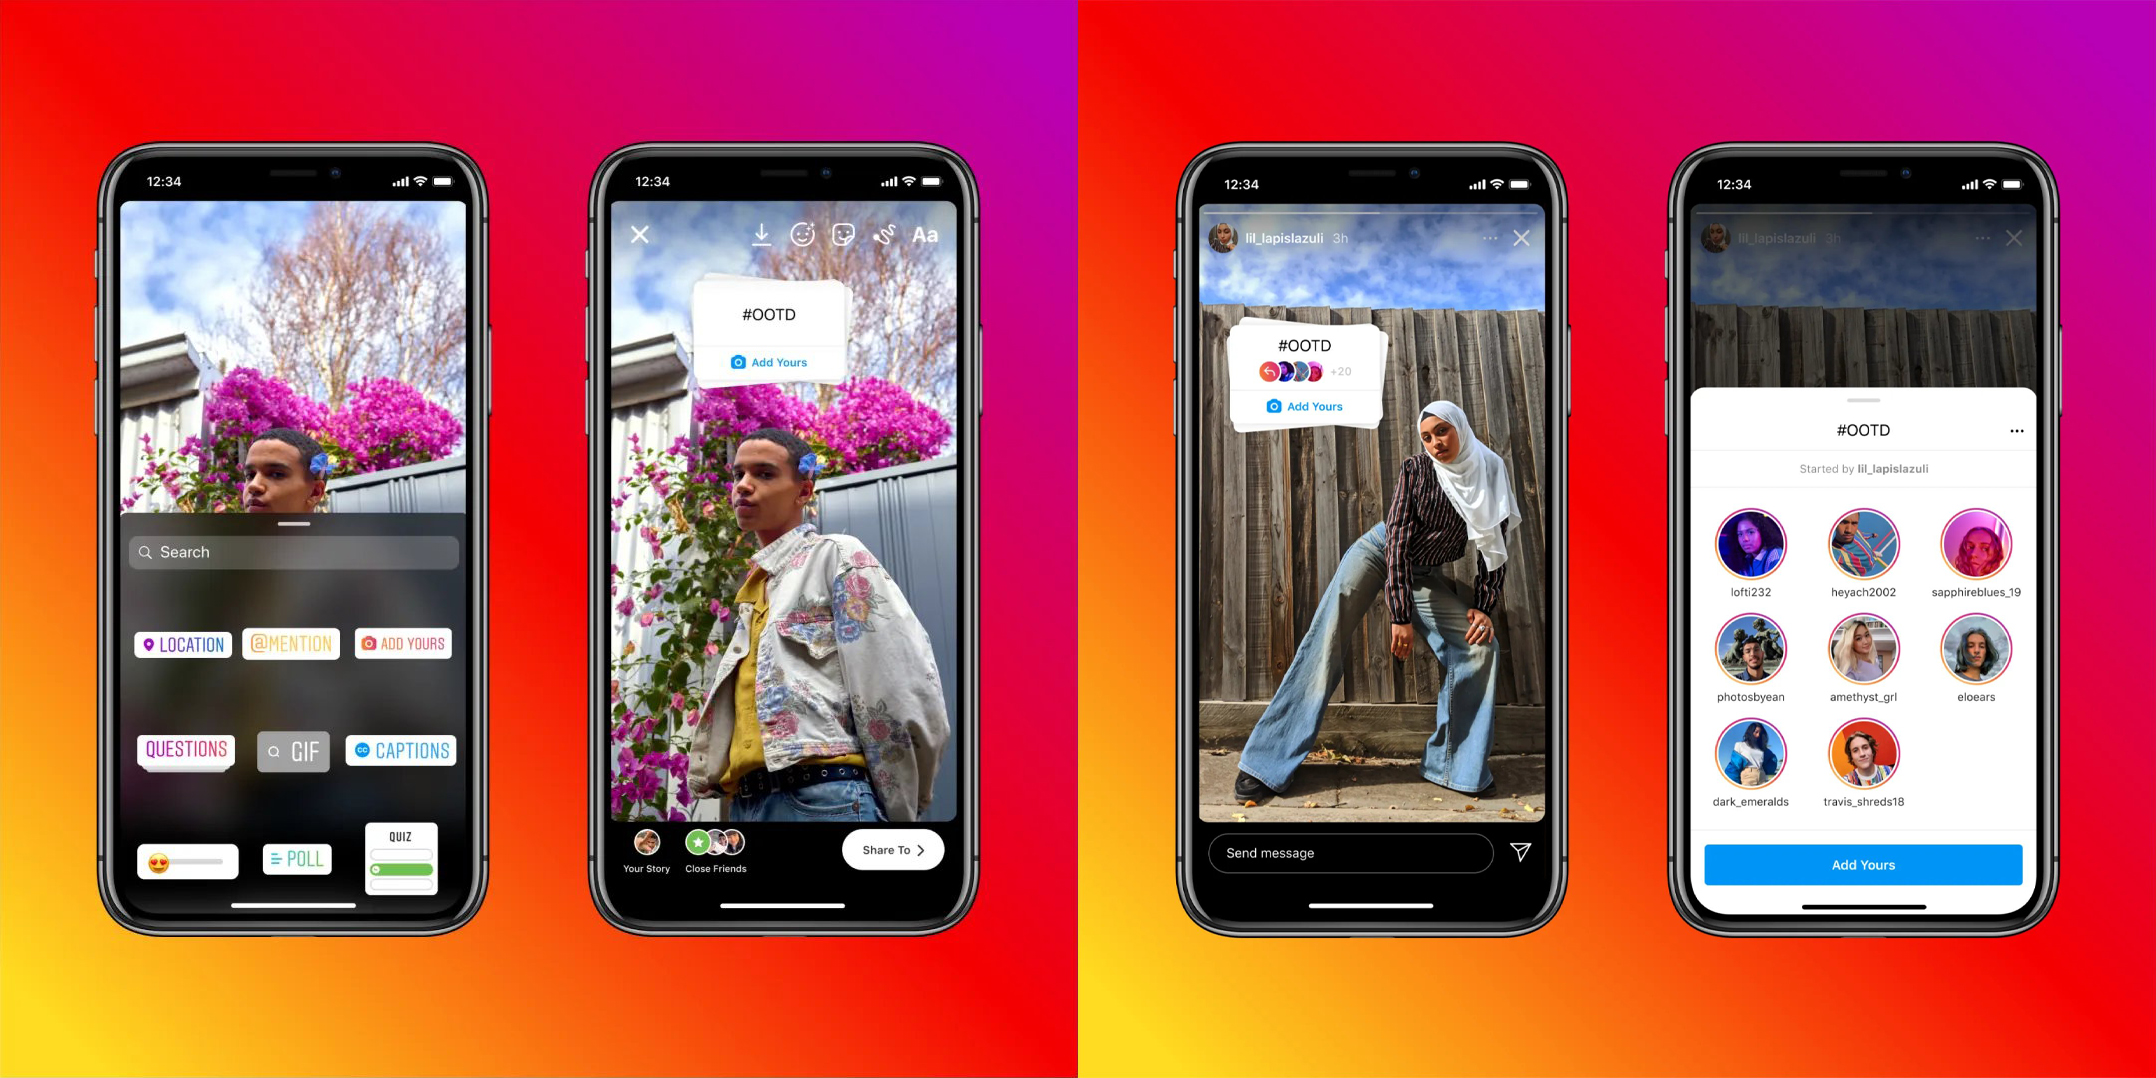 How Instagram’s new ‘Add Yours’ Story Sticker can increase engagement and exposure to your profile